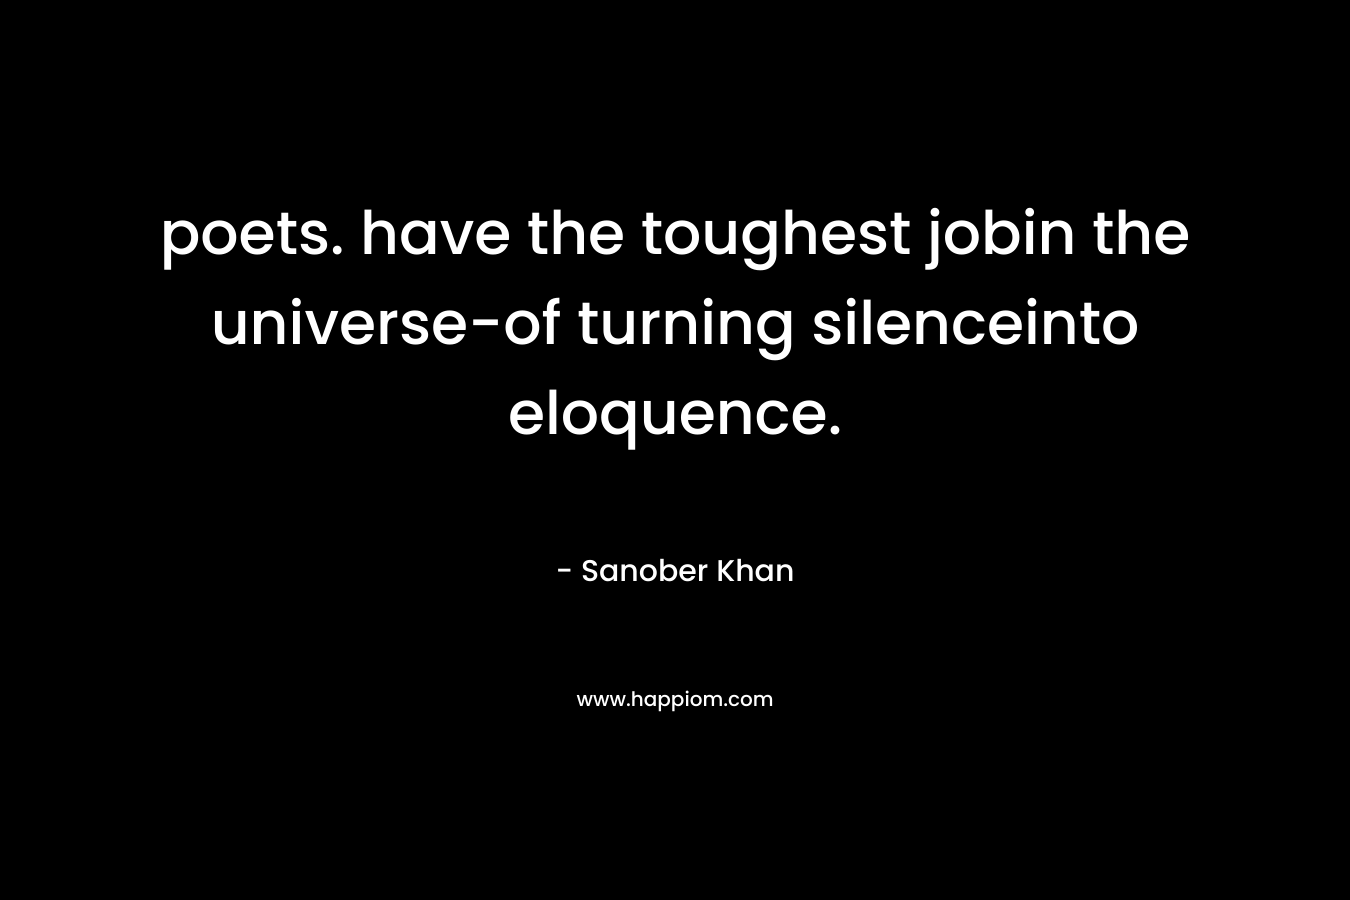 poets. have the toughest jobin the universe-of turning silenceinto eloquence.